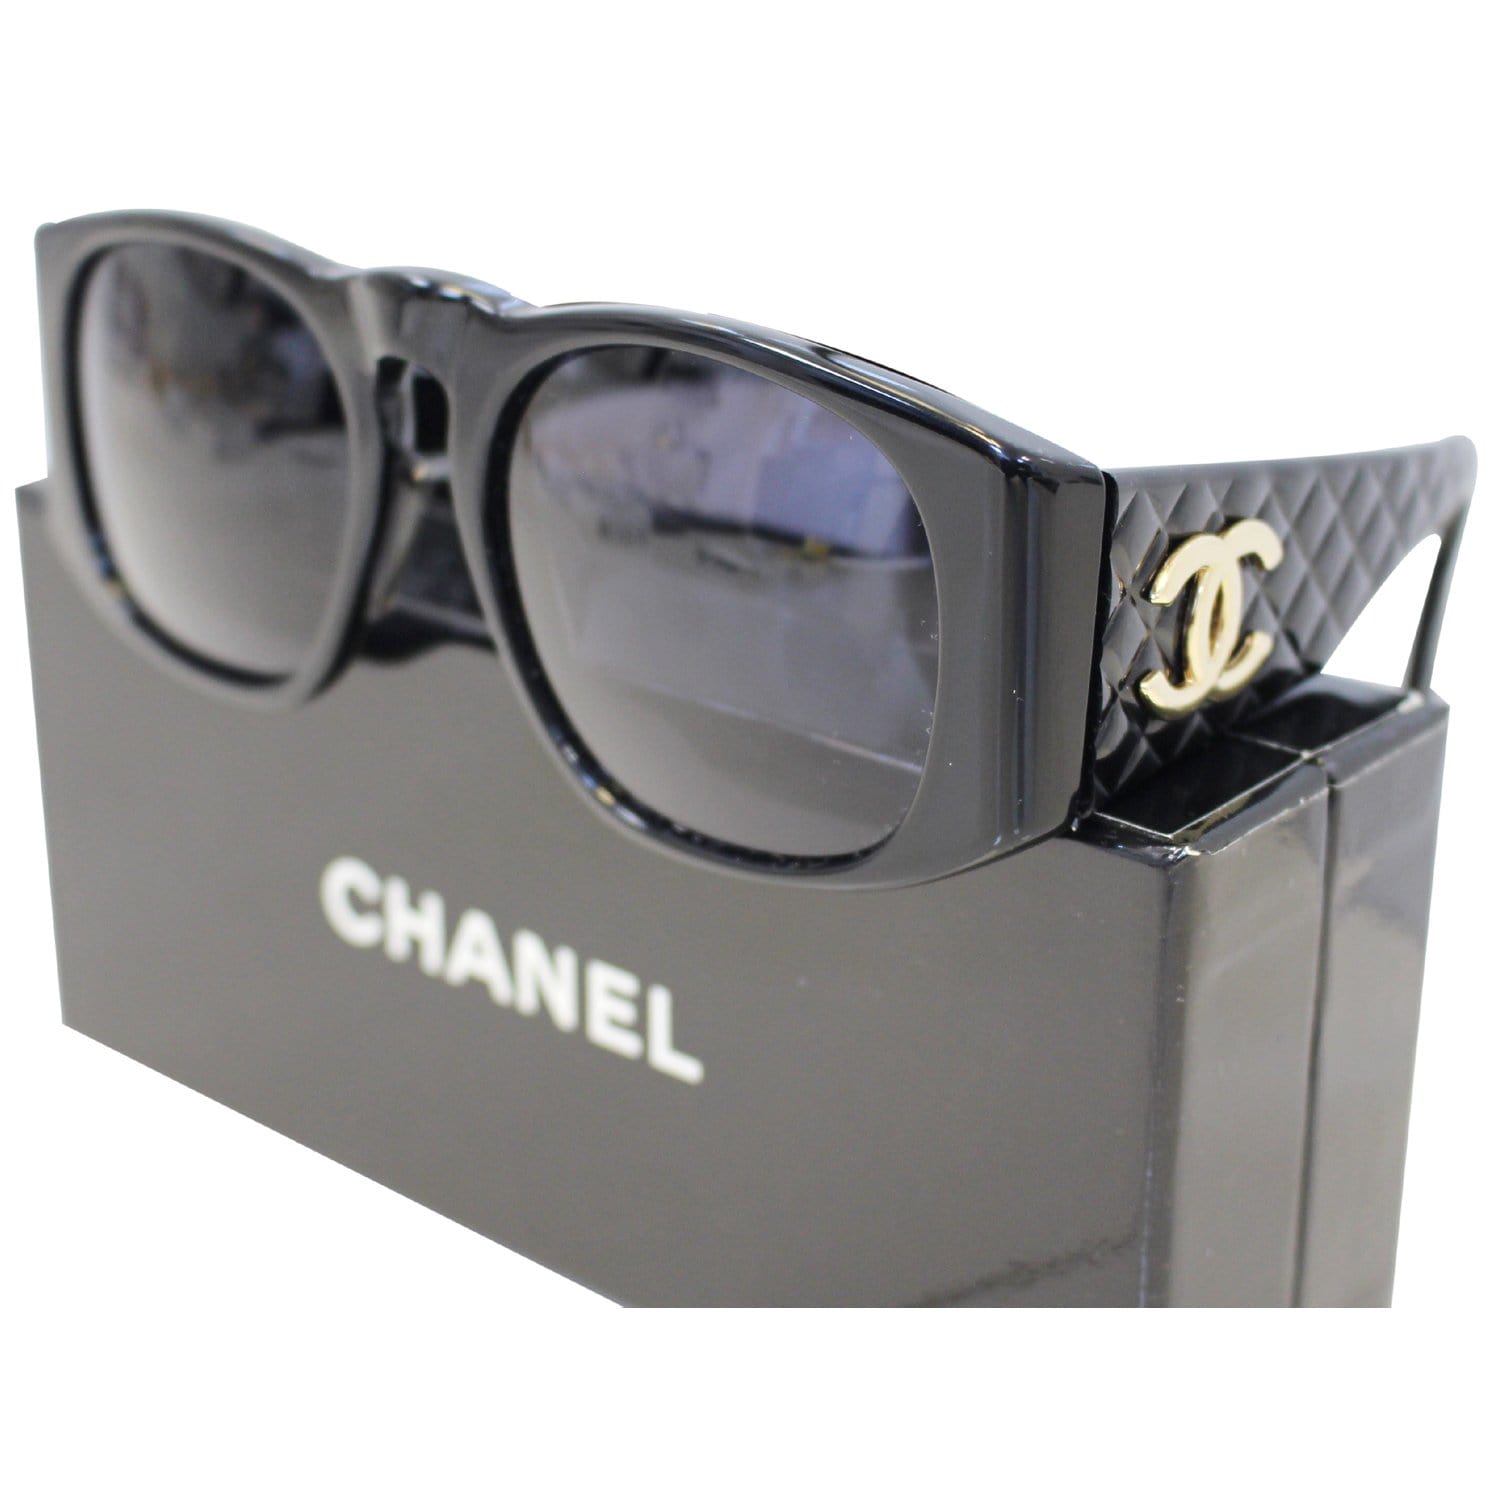 Vintage Chanel Sunglasses  Black and Brown Lambskin Quilted  SOLD   Cabana Eyewear  Palm Springs CA